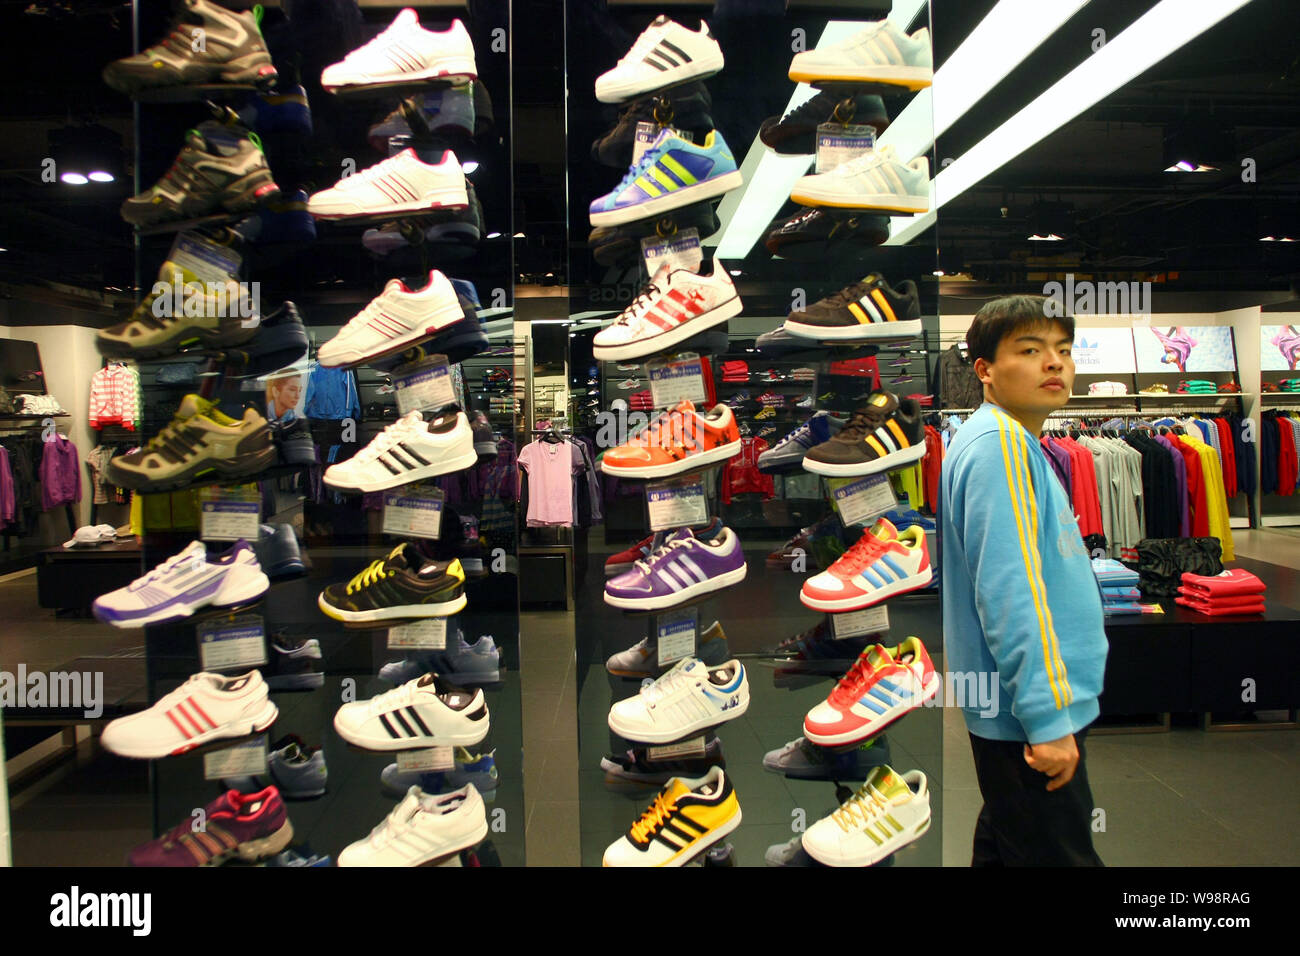 https://c8.alamy.com/comp/W98RAG/a-chinese-staff-stands-next-to-adidas-sports-shoes-on-display-in-an-adidas-sportswear-store-in-shanghai-china-23-february-2011-adidas-ag-posted-r-W98RAG.jpg